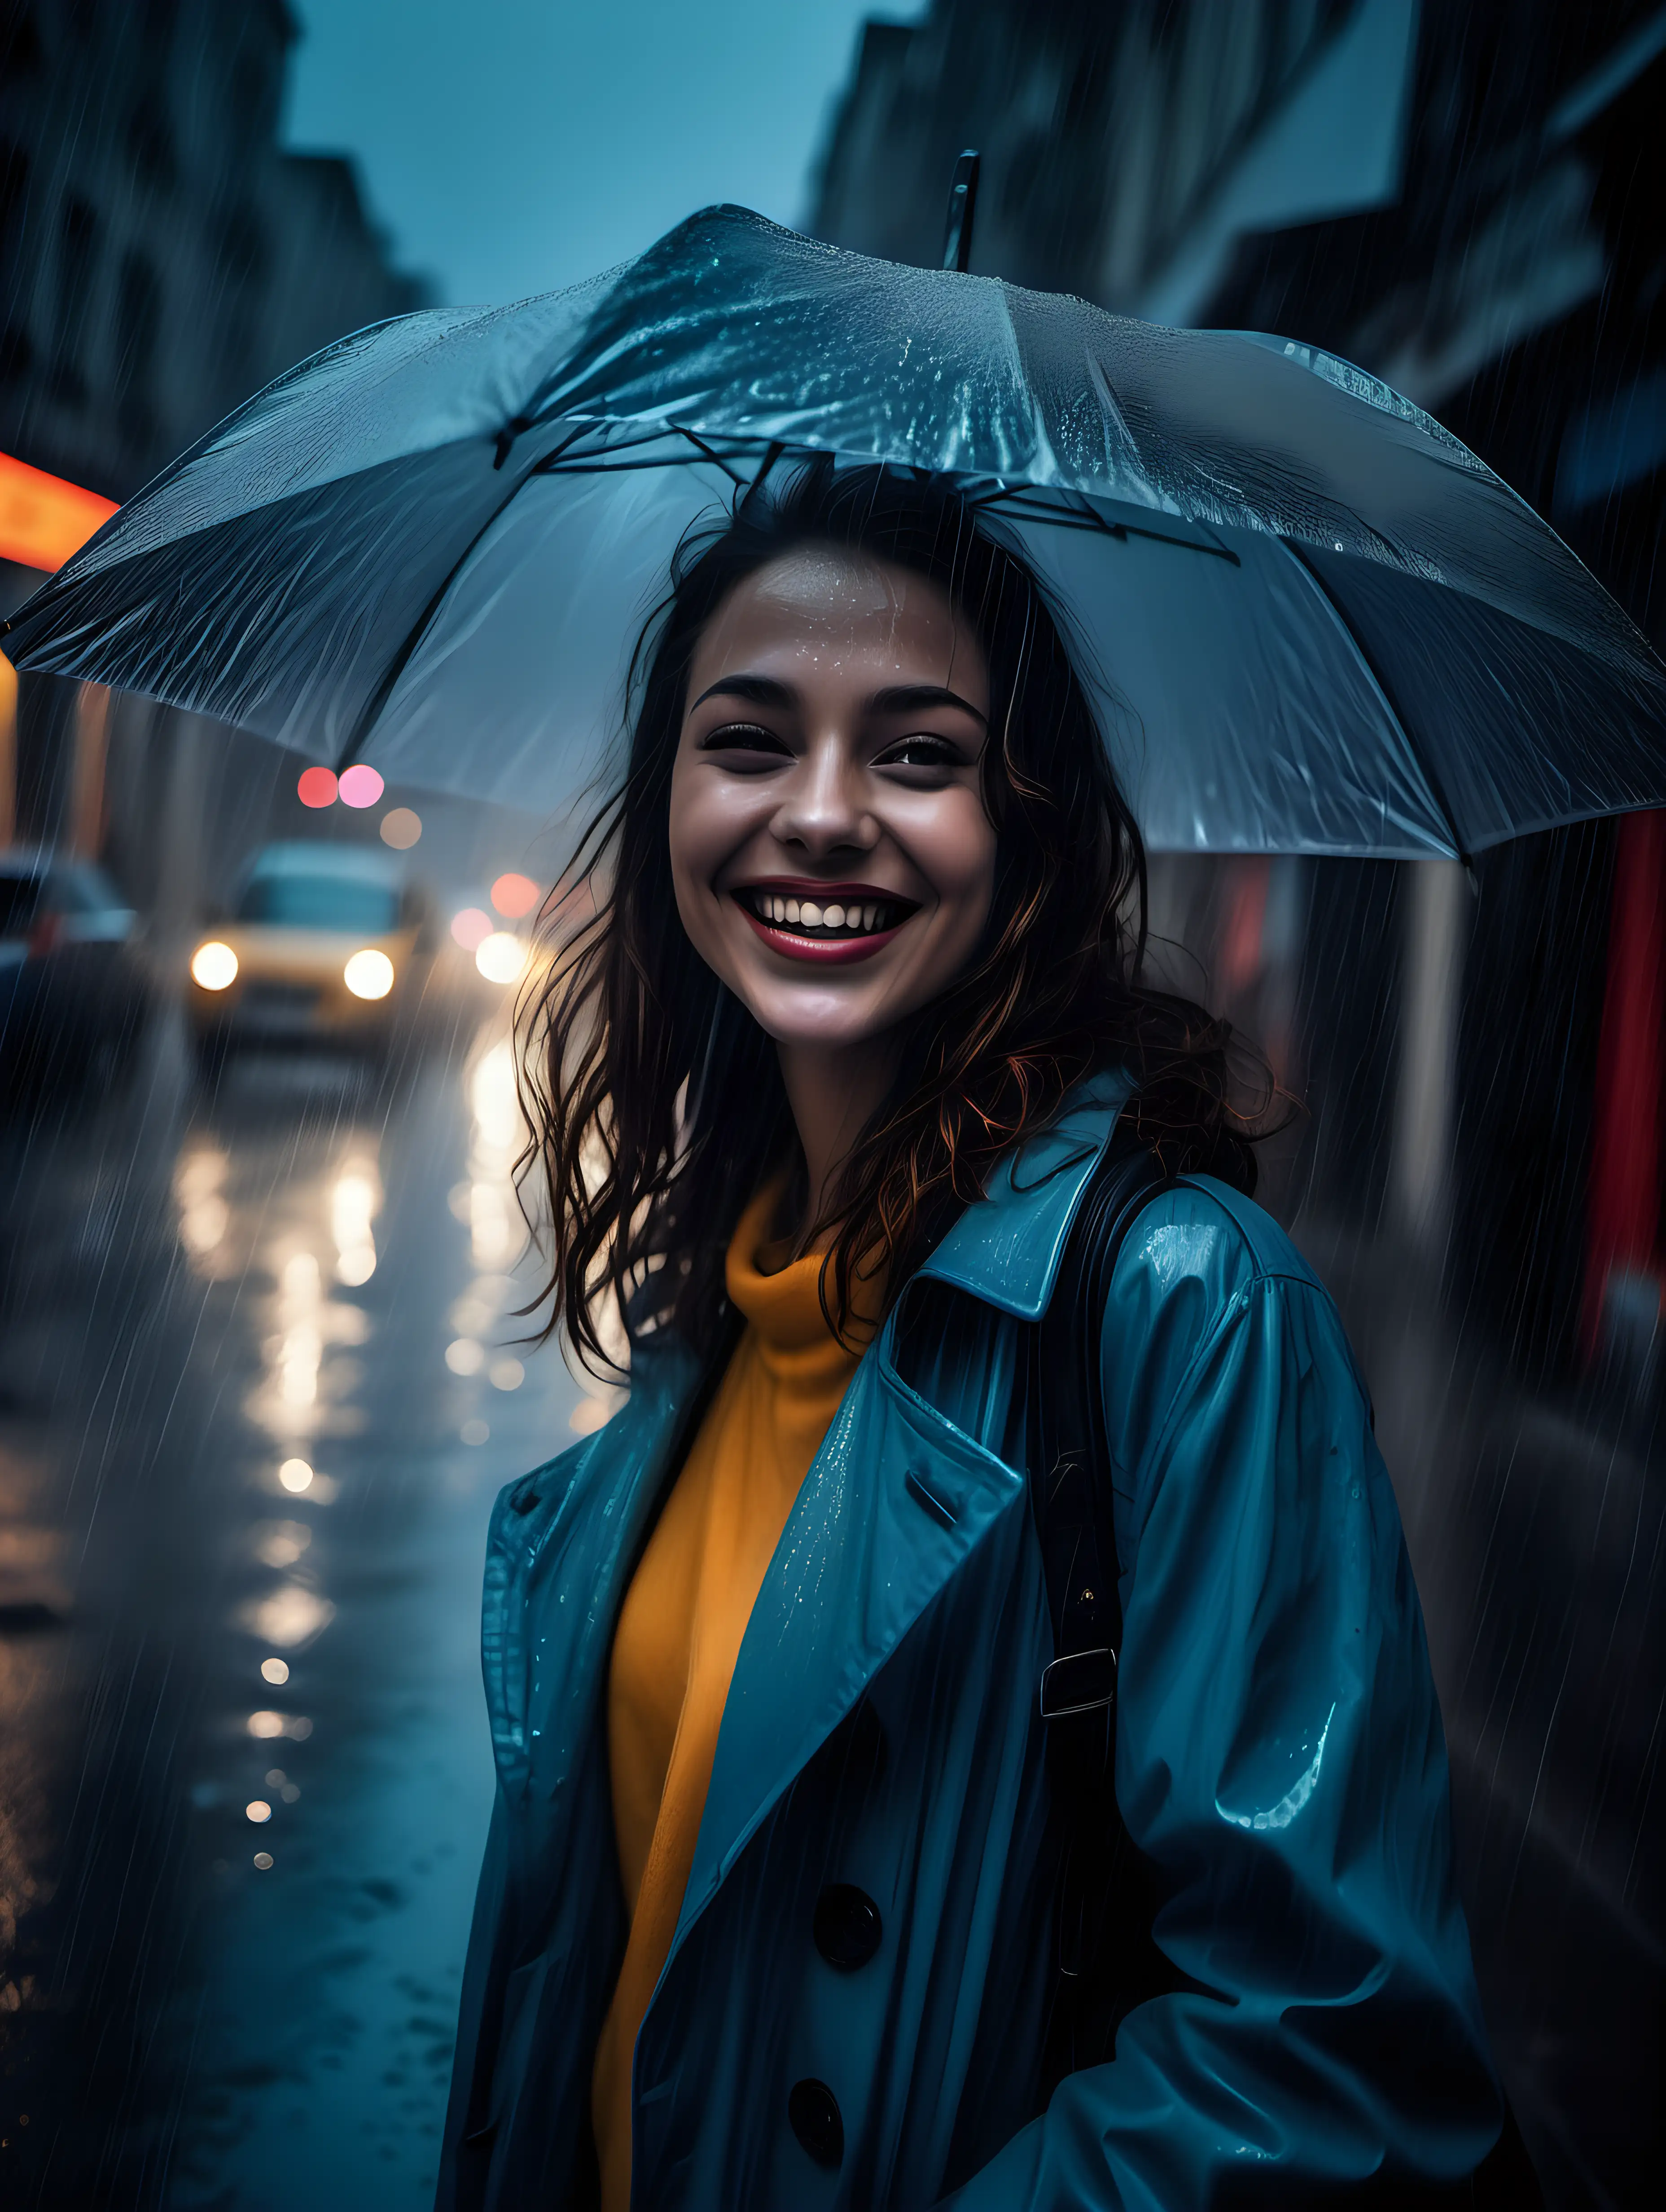 Captivating Cinematic Contrast Smiling Woman Amidst Blurred City Lights in the Rain